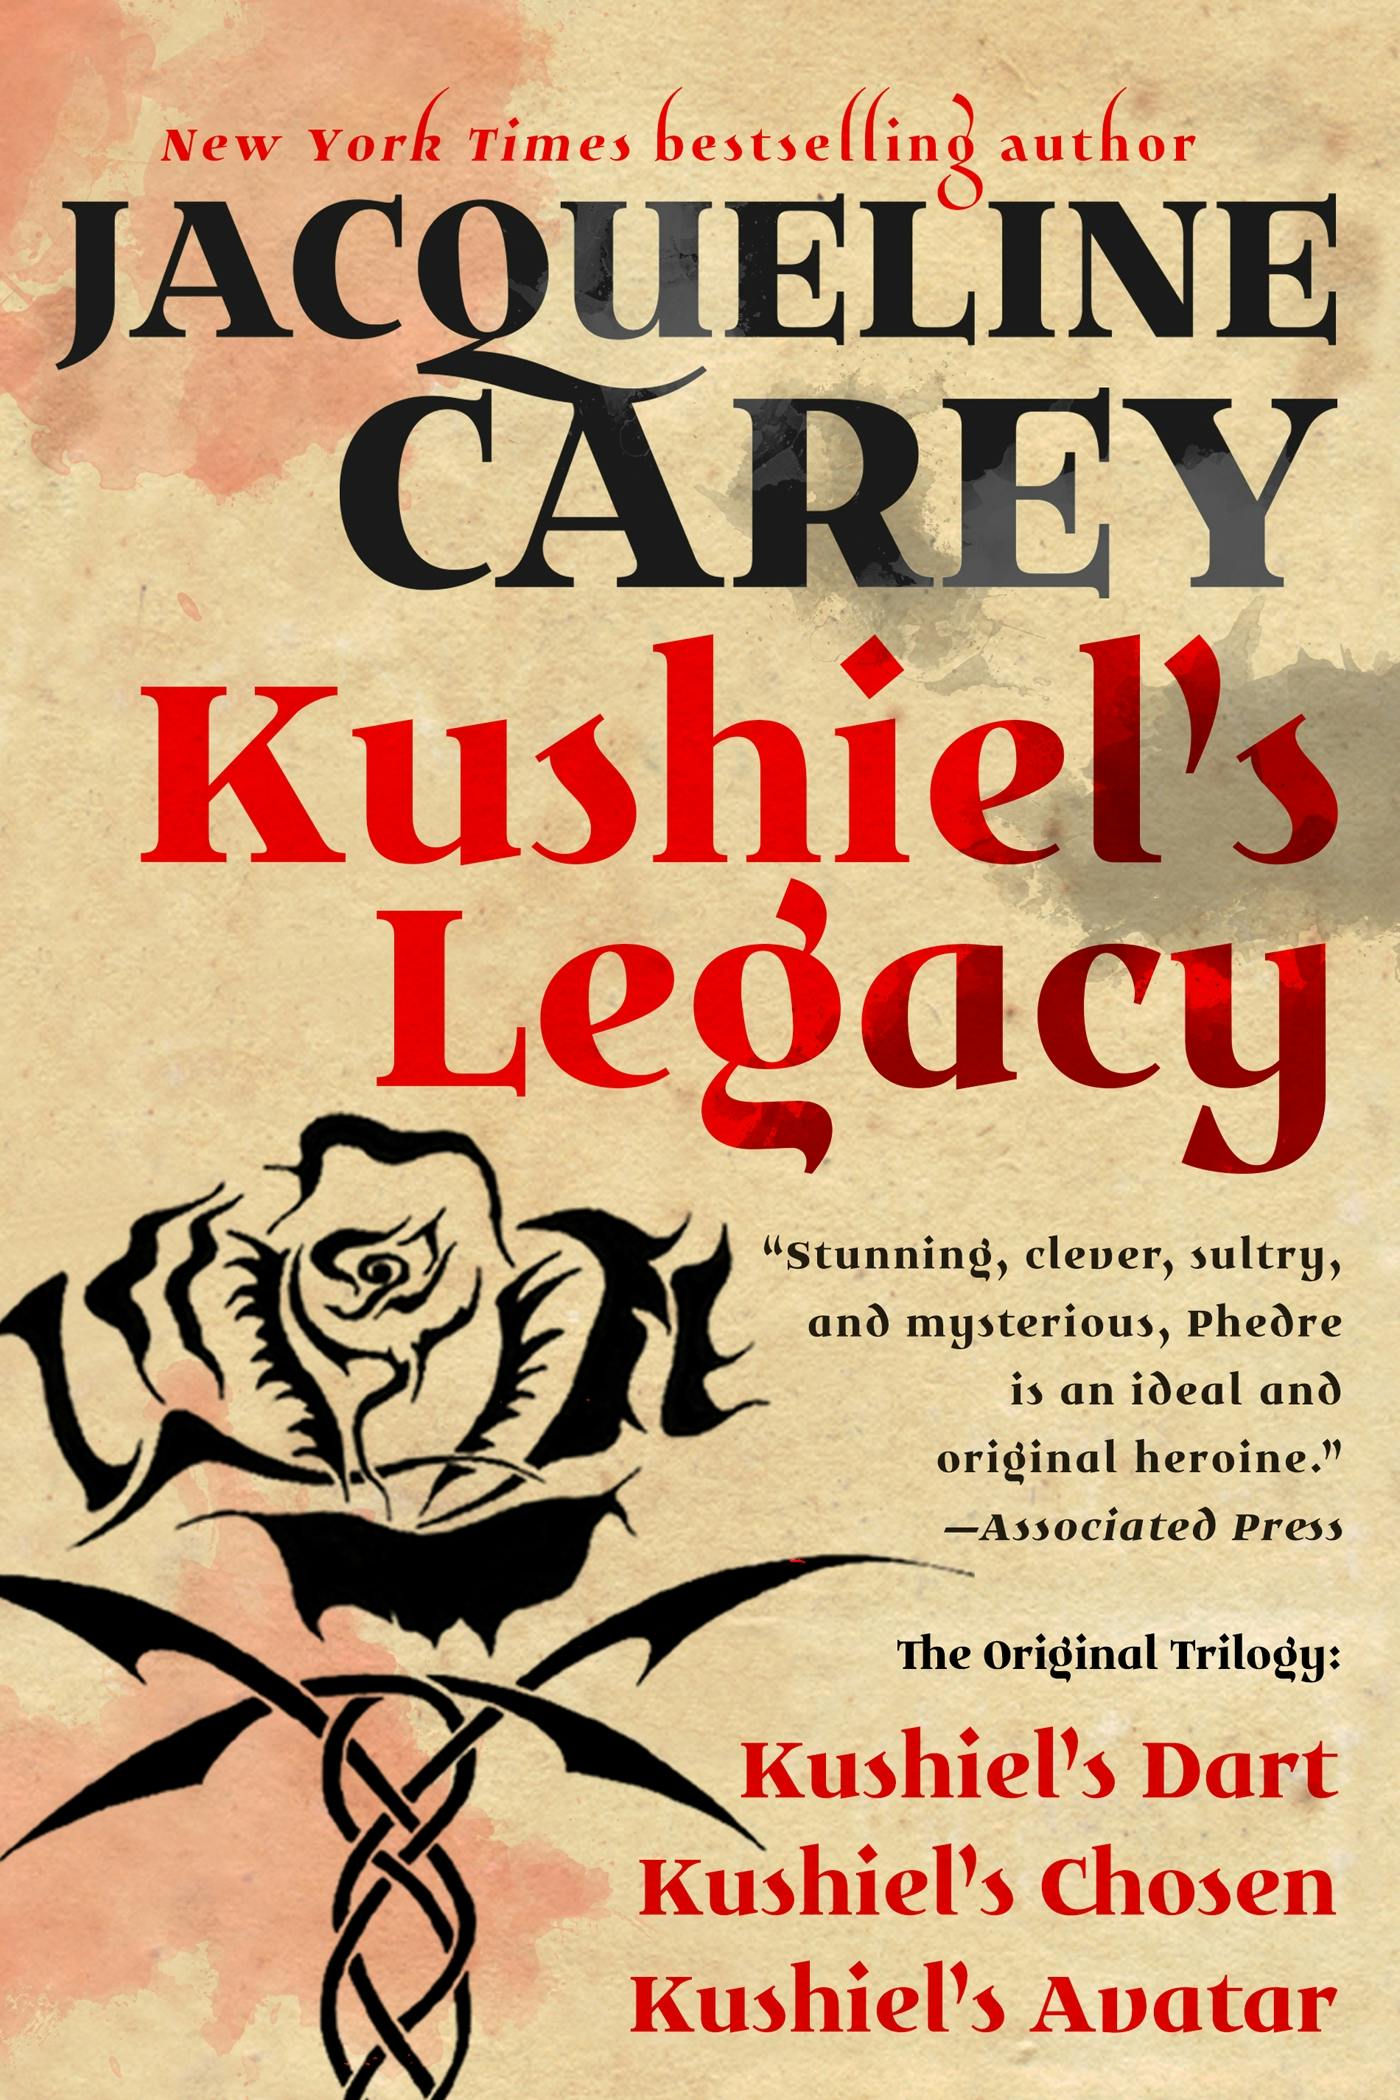 Cover for the book titled as: Kushiel’s Legacy